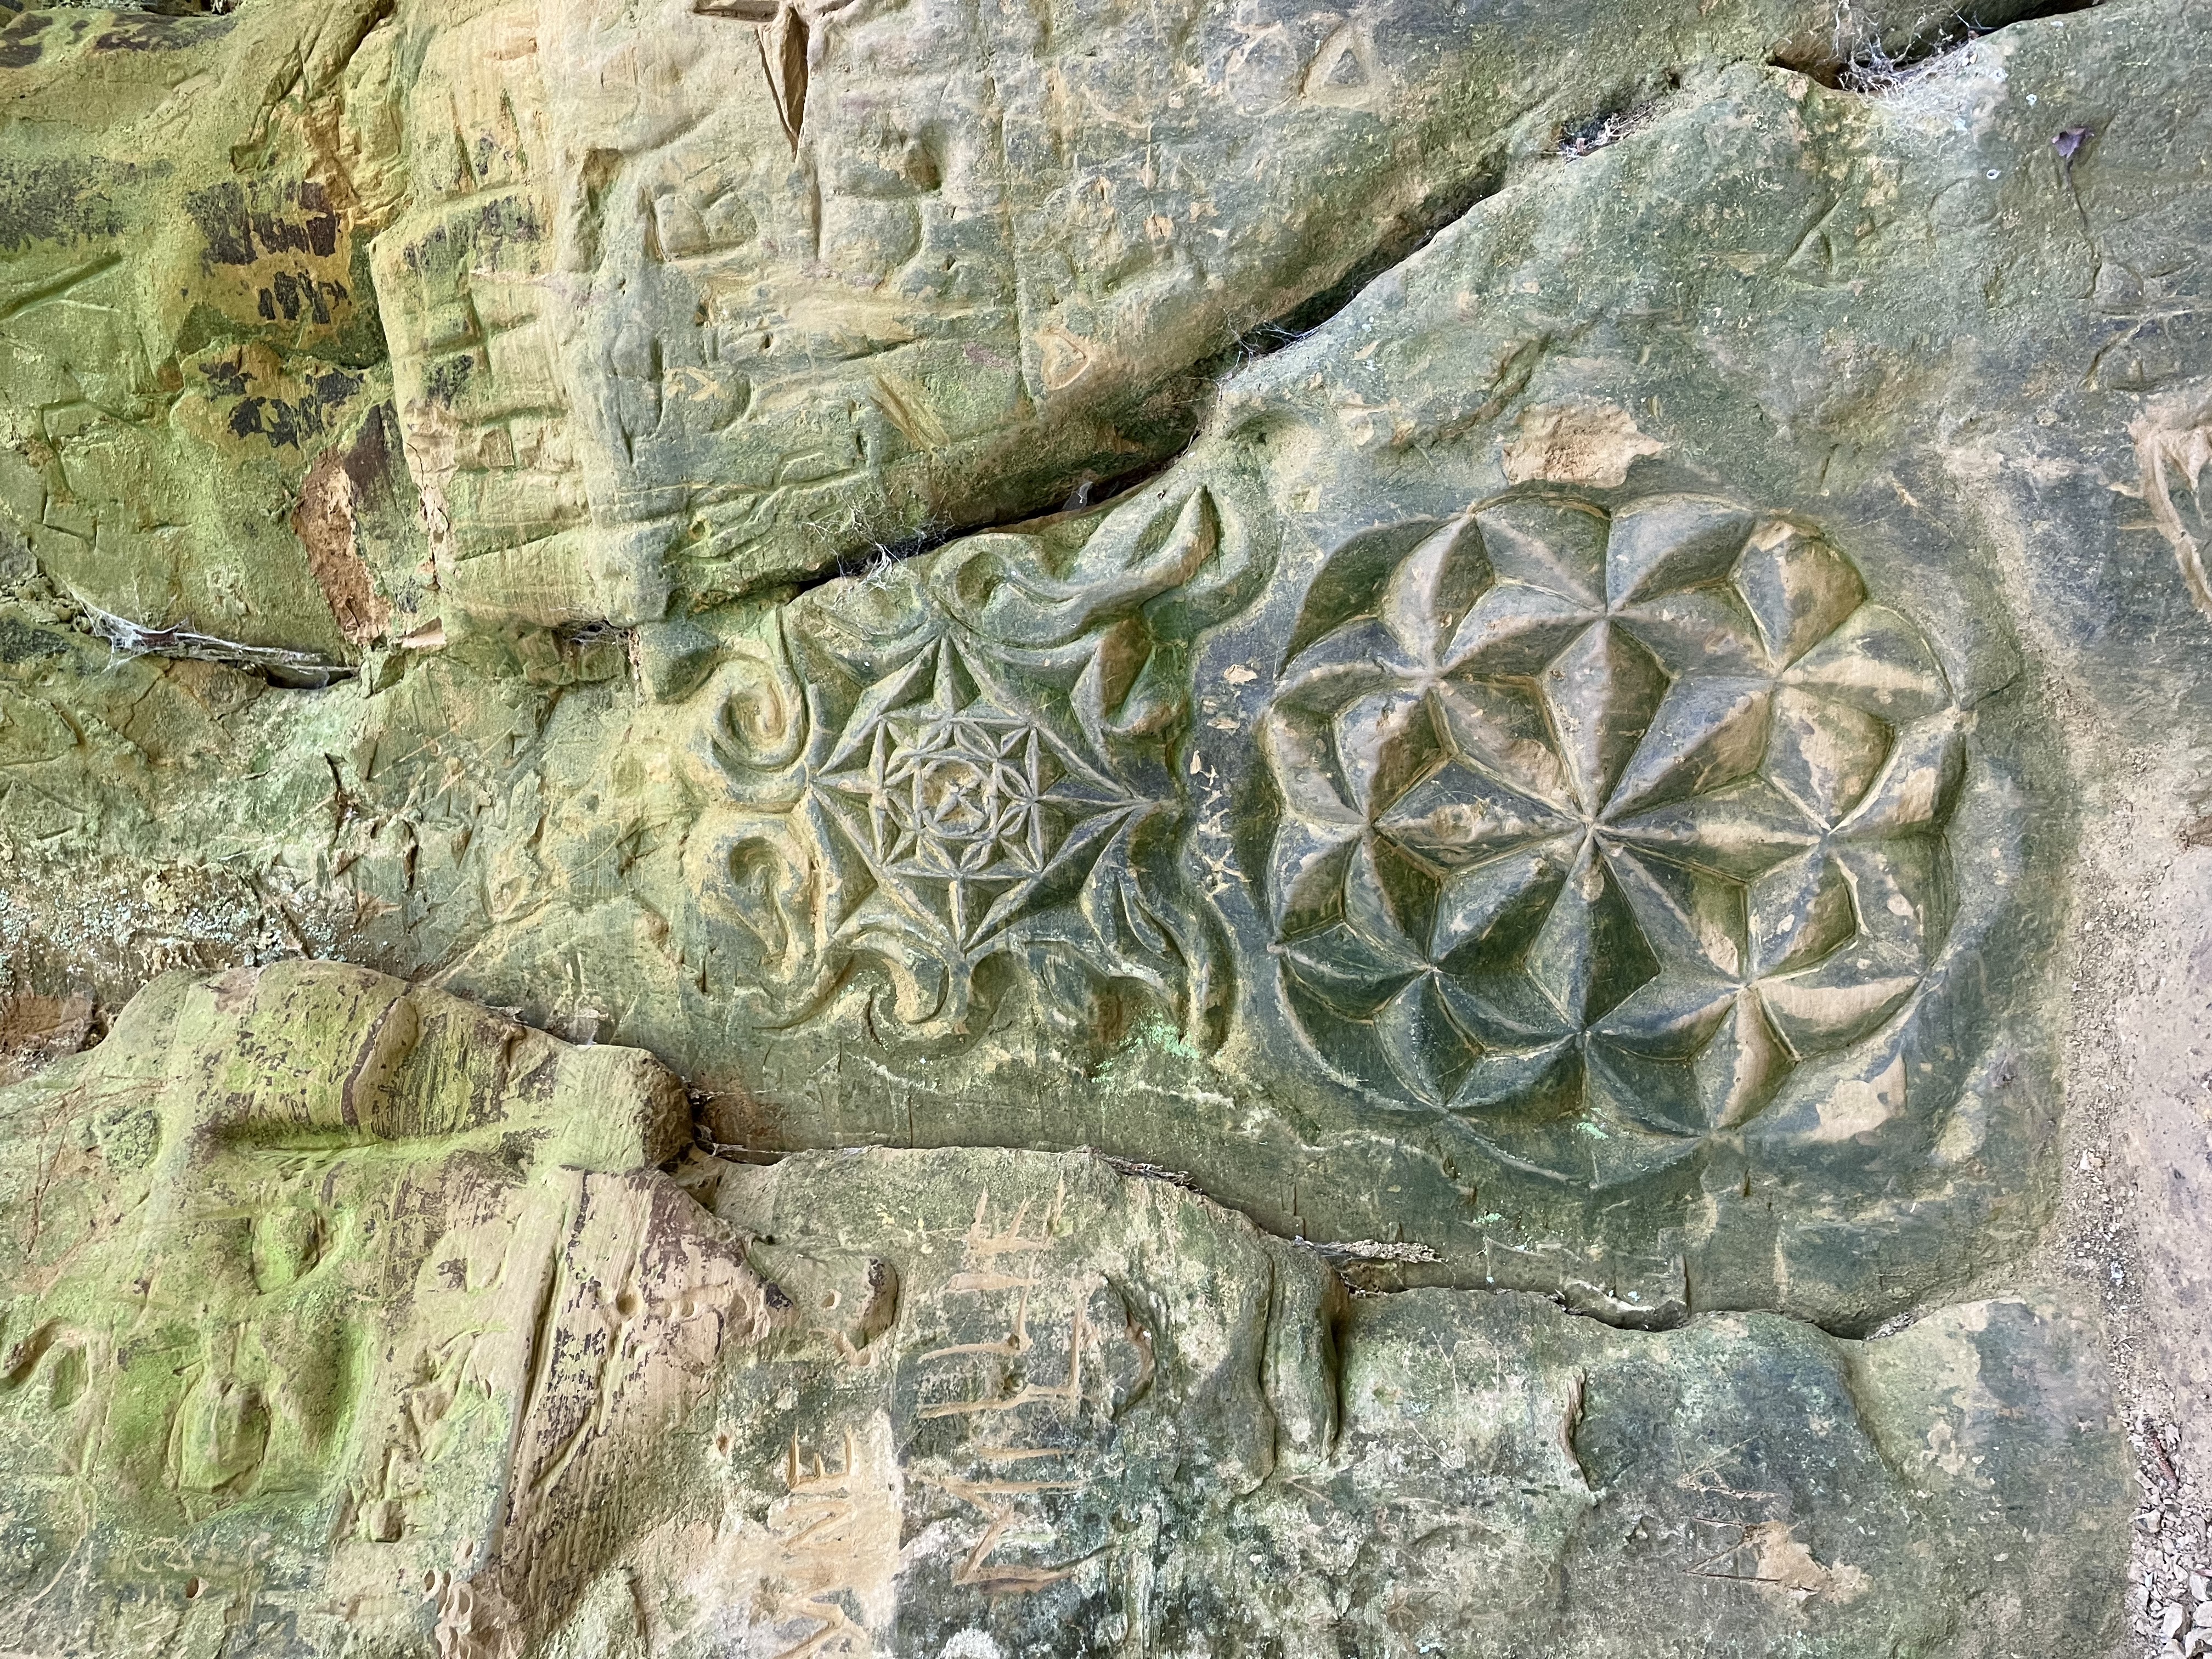 Carvings on the sandstone banks of Shute's Lane